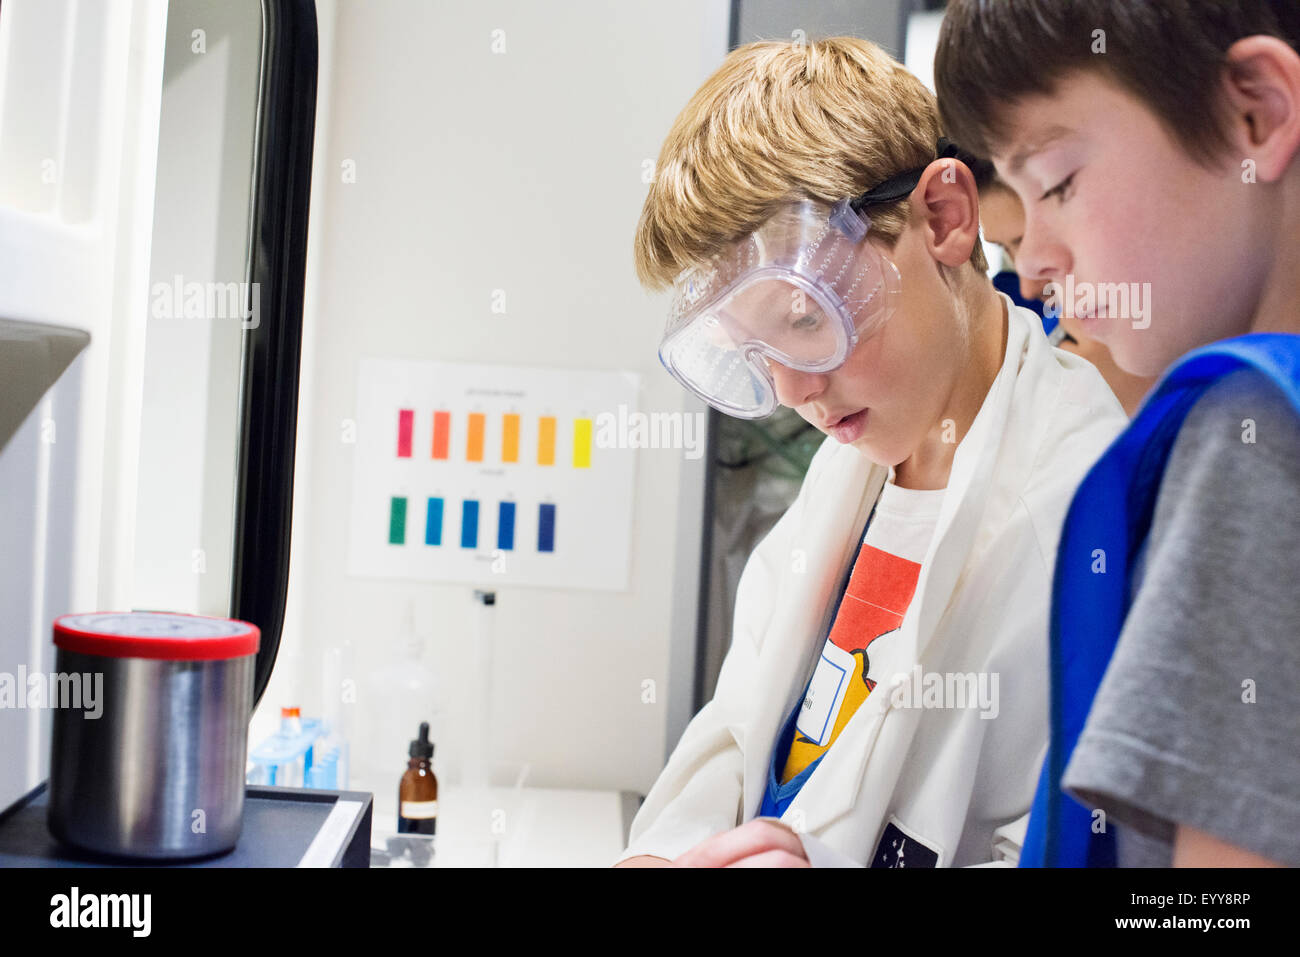 Students working together in science lab Stock Photo